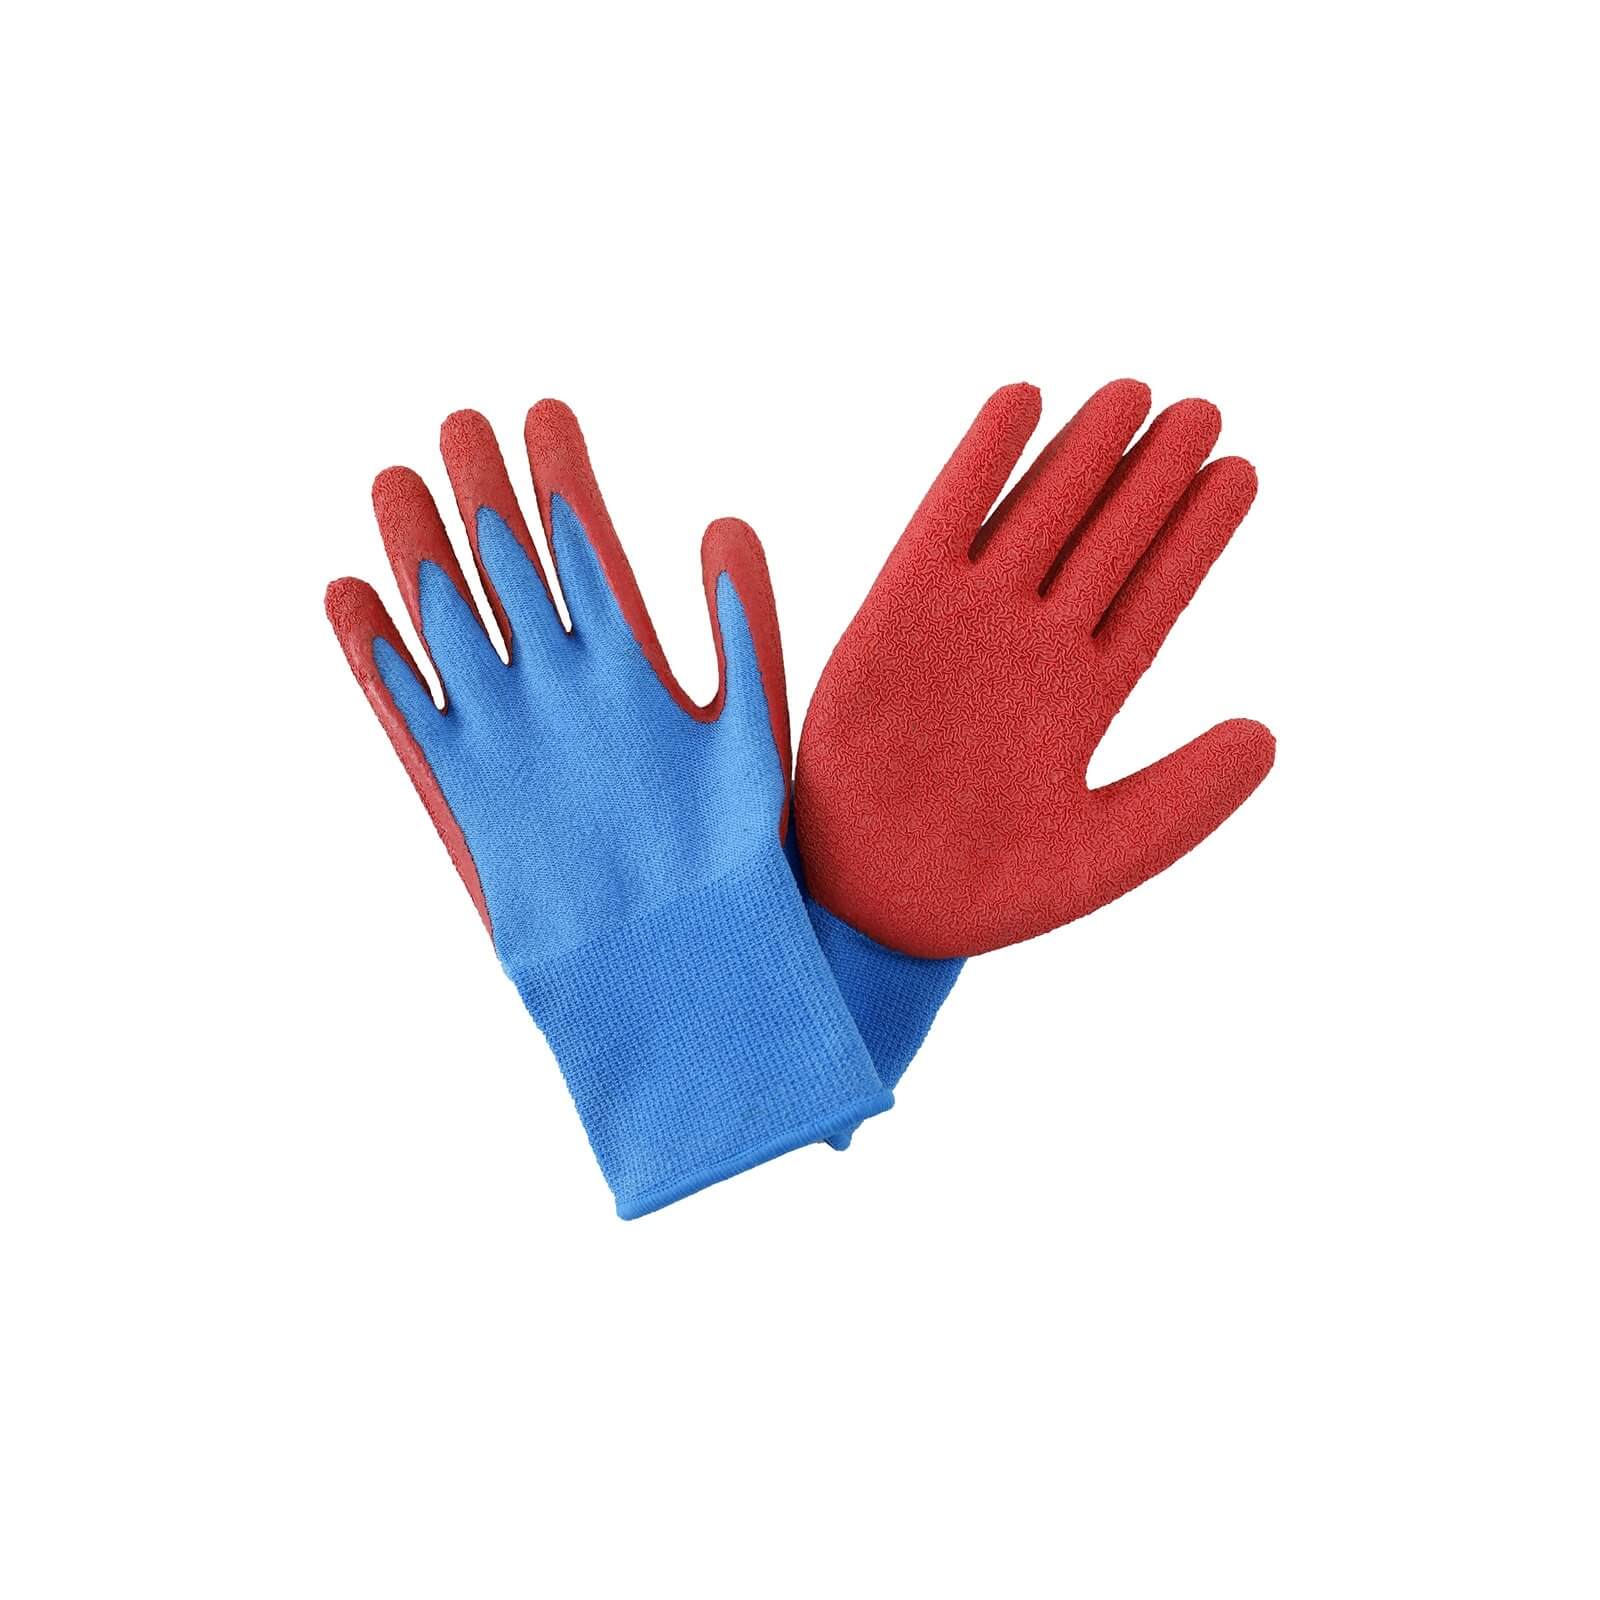 Photo of Budding Gardener Gloves - Blue And Red Kids